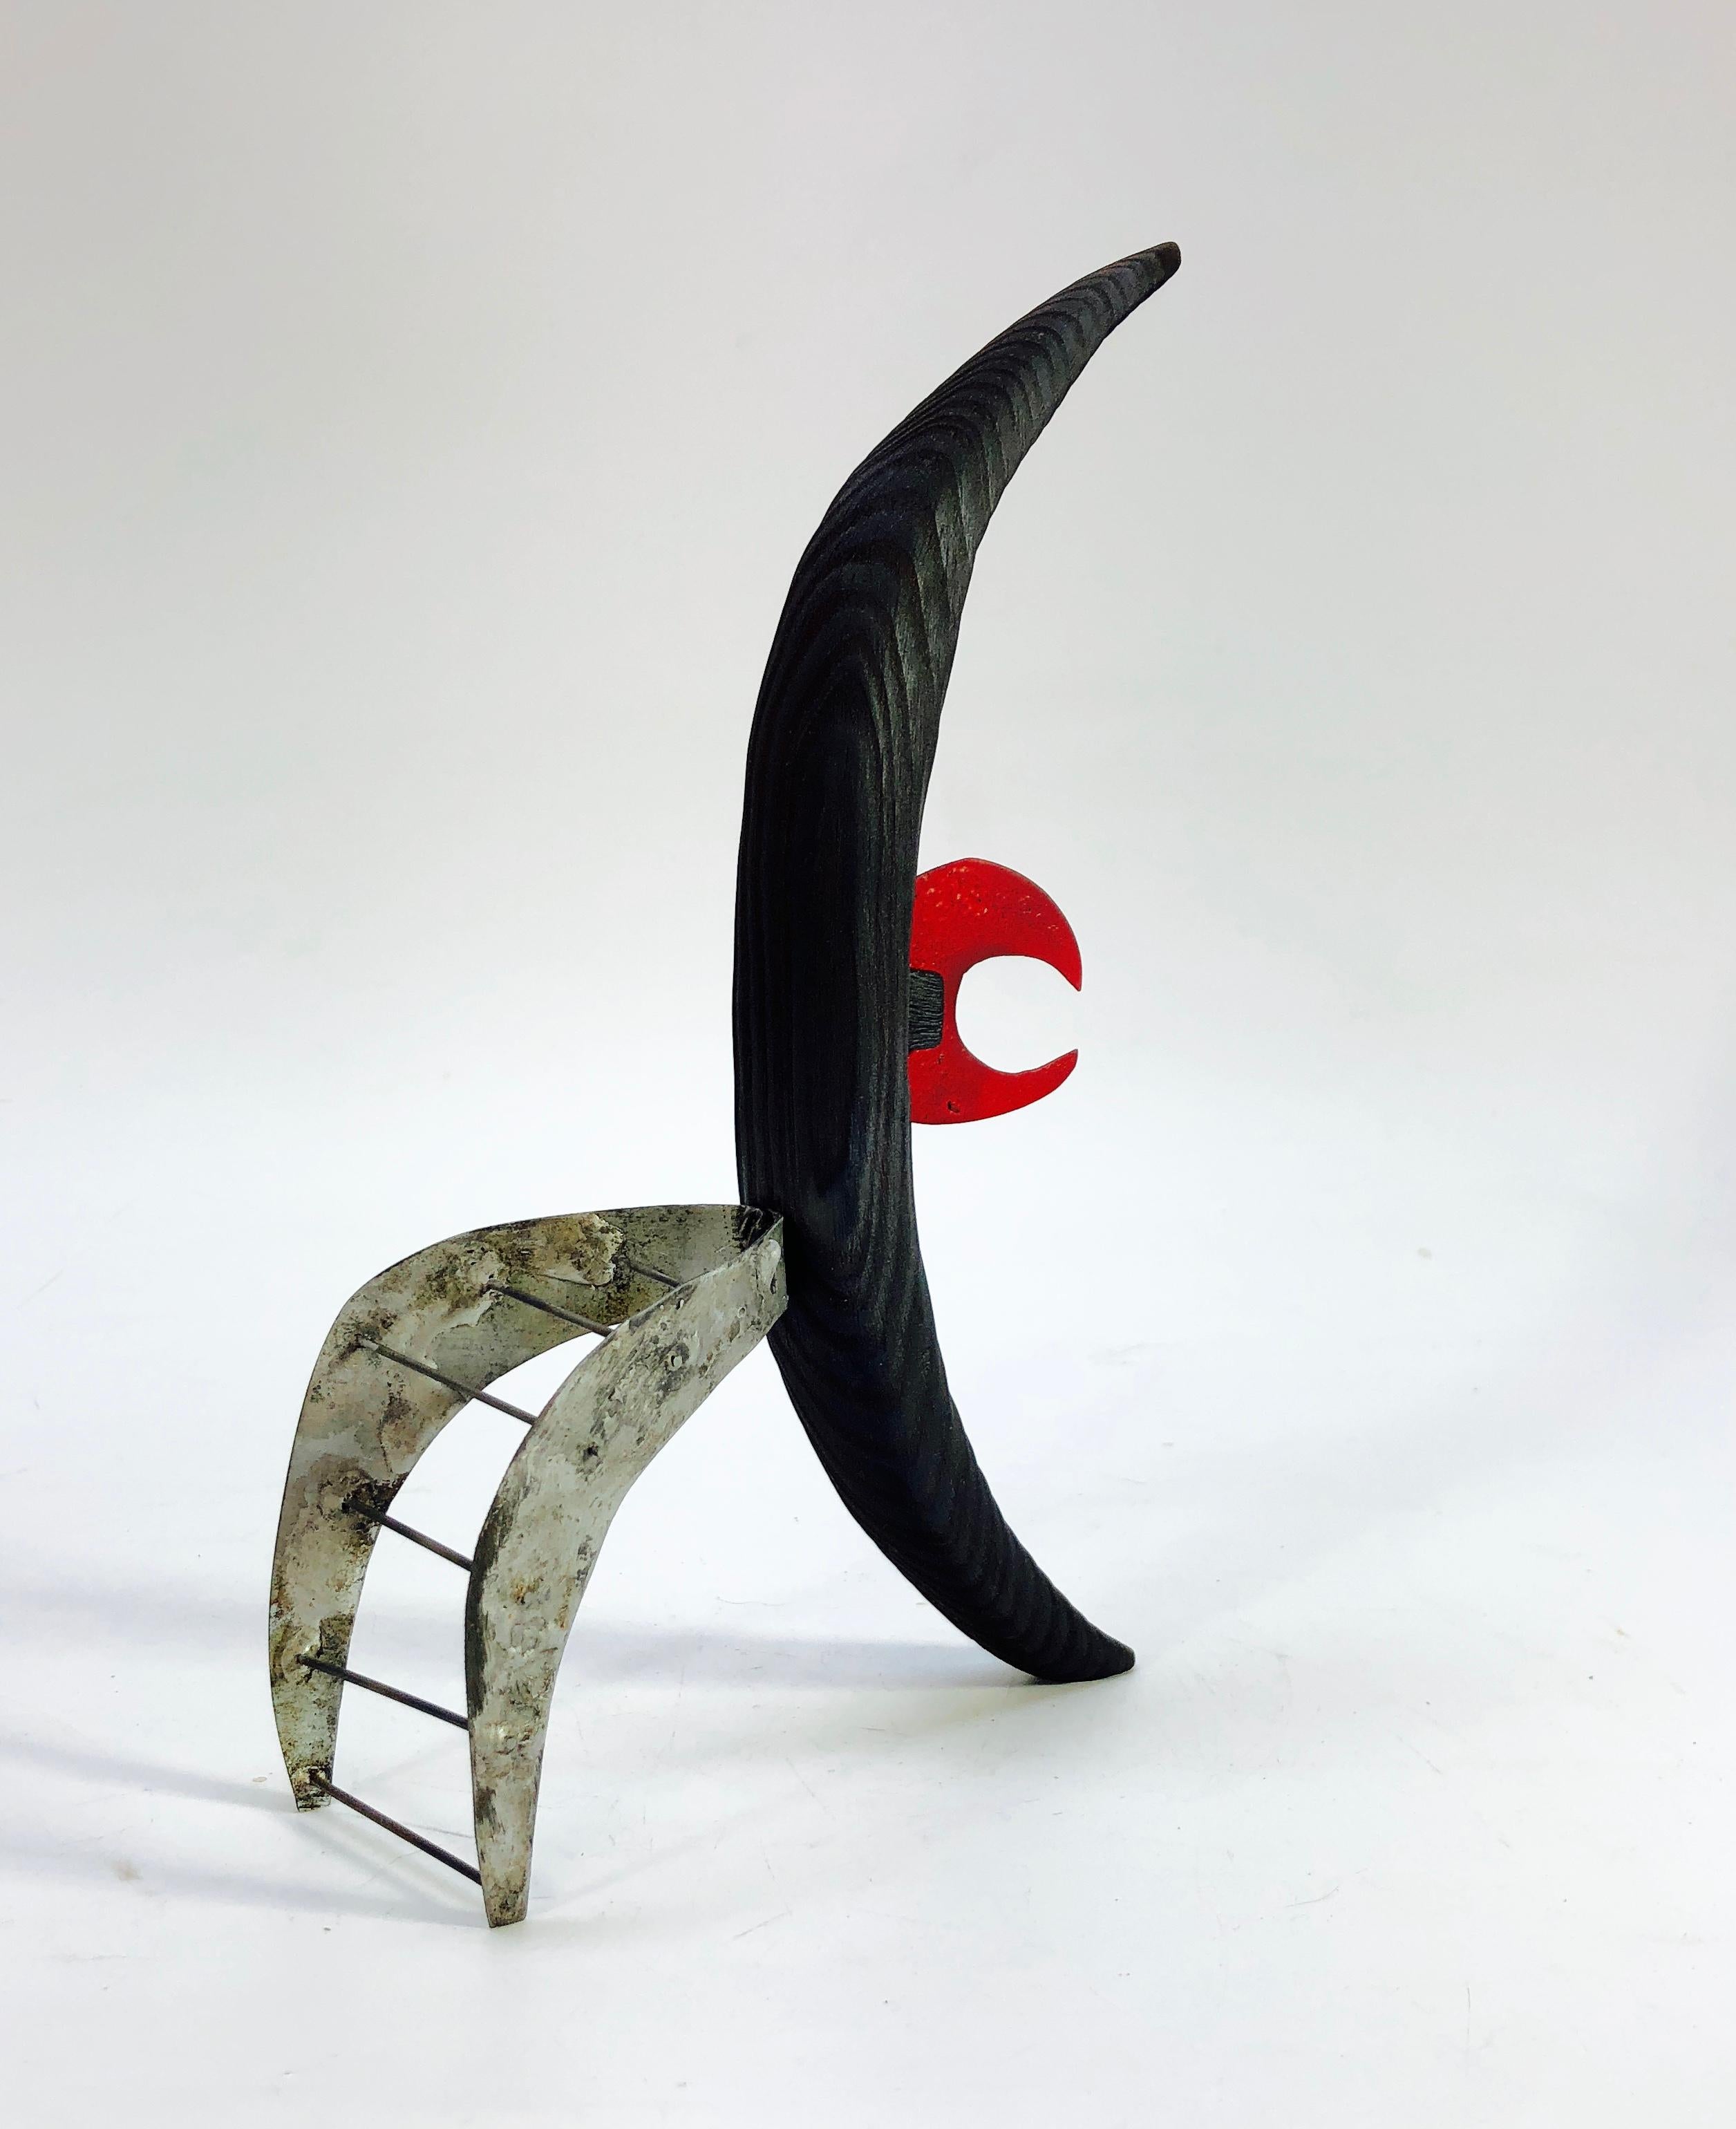 Adam Henderson's open window abstract sculpture comprised of 4 crescent shaped pieces in wood and sheet metal.